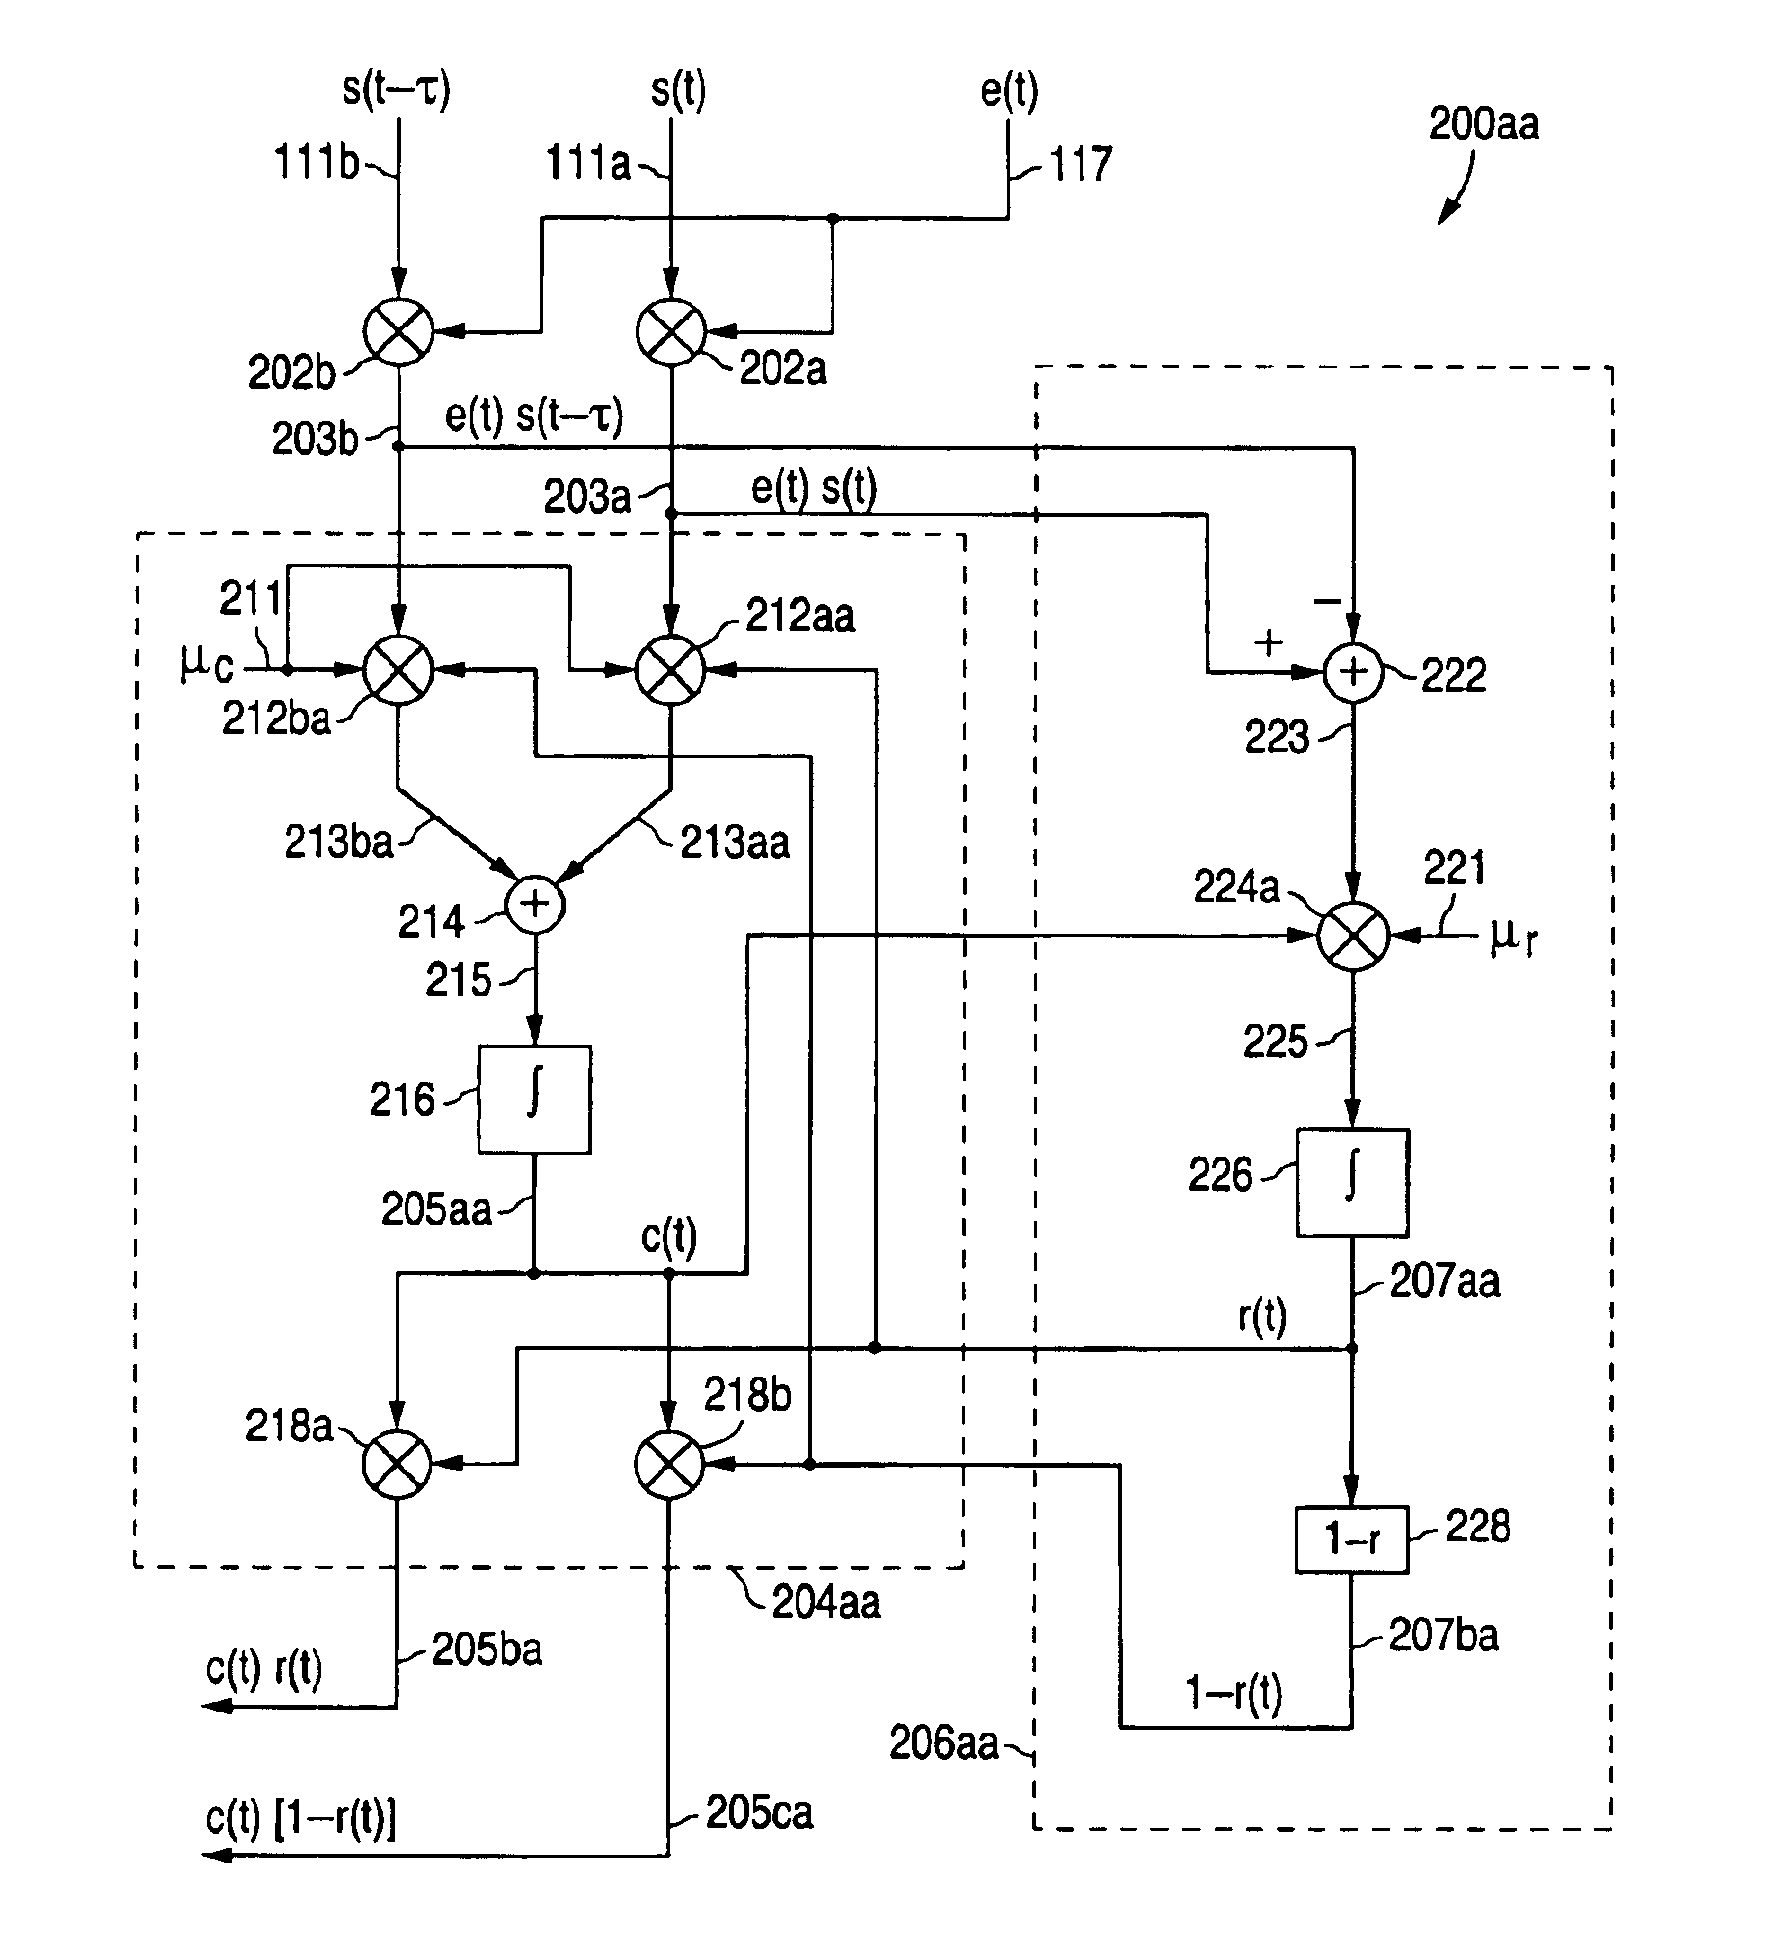 Adaptive coefficient signal generator for adaptive signal equalizers with fractionally-spaced feedback